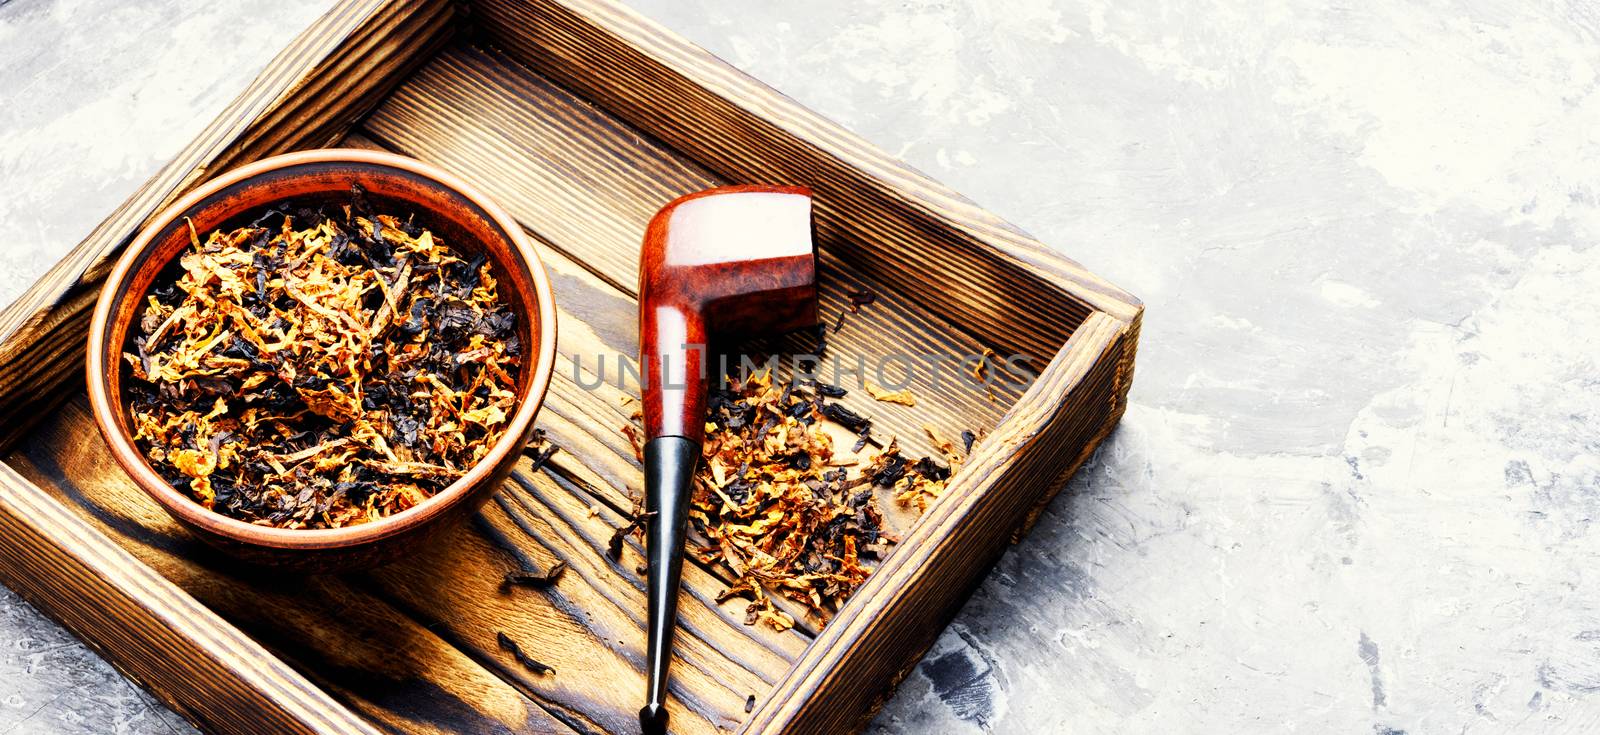 Smoking pipe and tobacco by LMykola